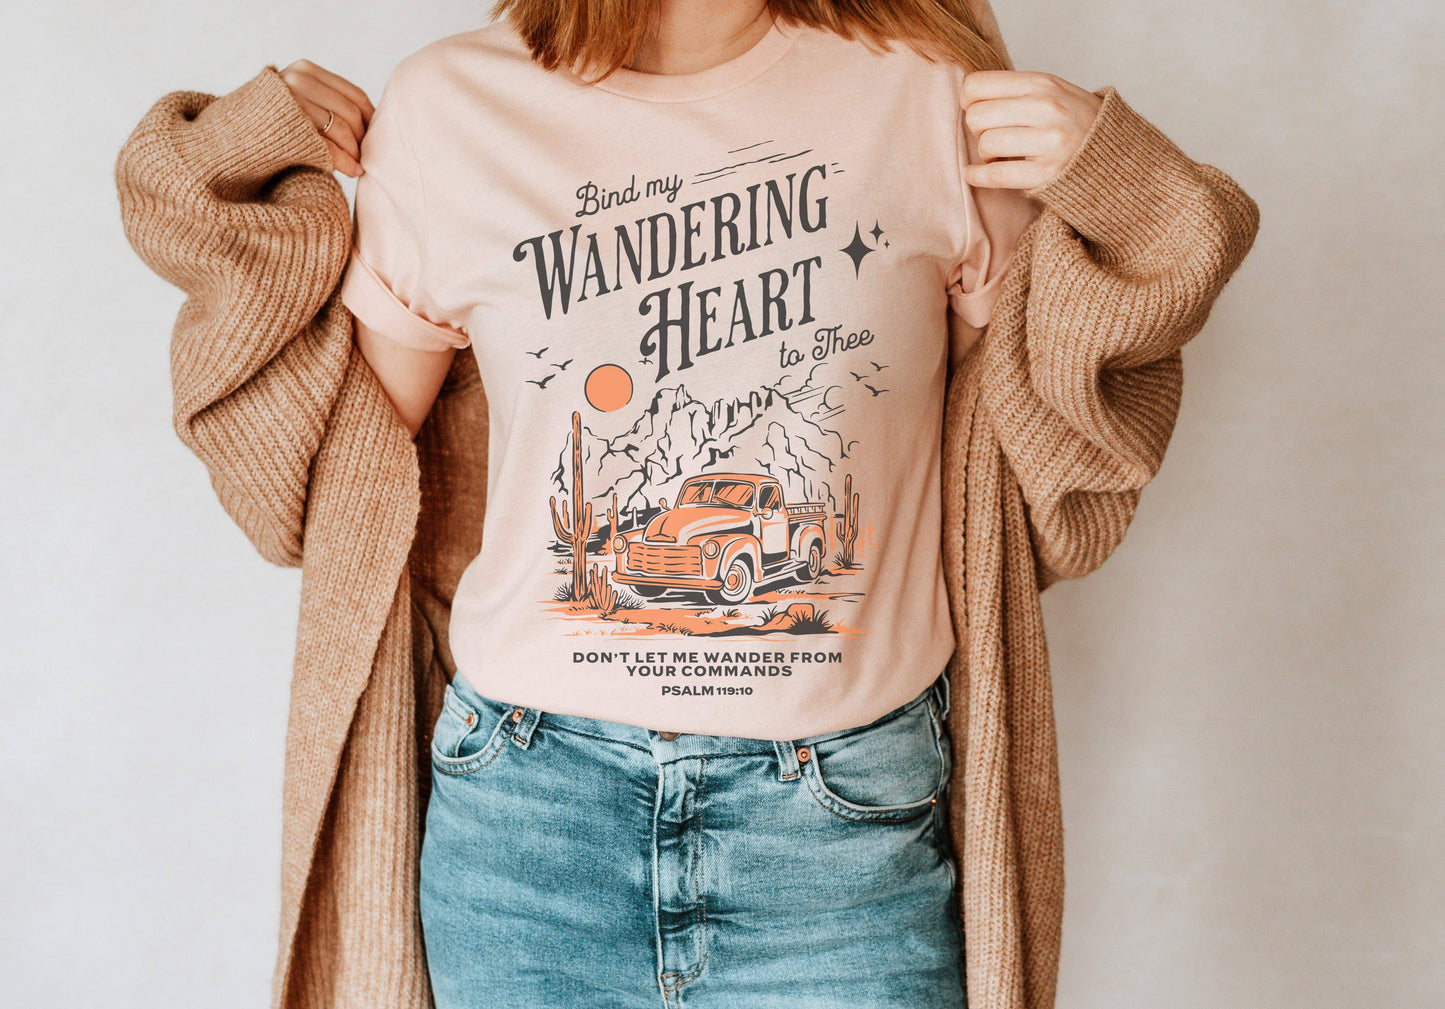 Amy Anne Apparel Inc - Bind My Wandering Heart Graphic Tee l Christain Tee